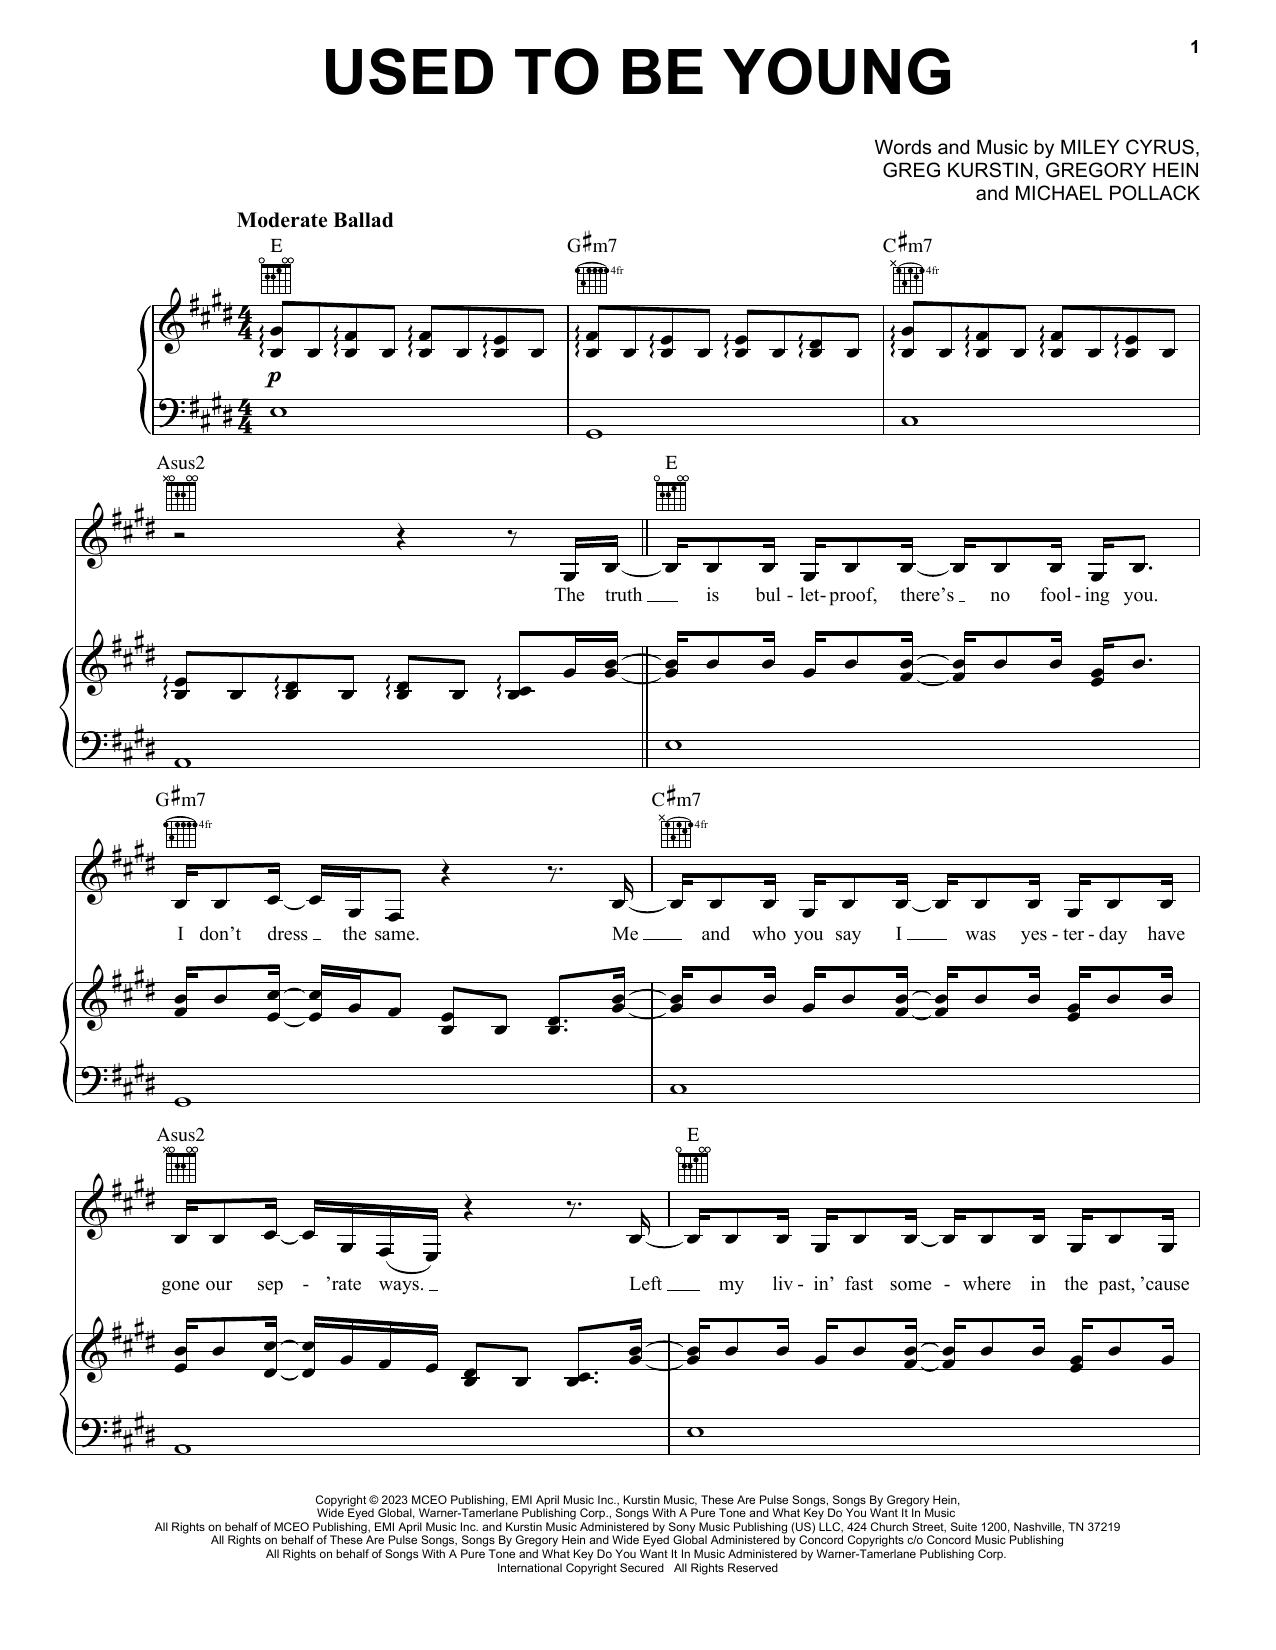 Download Miley Cyrus Used To Be Young Sheet Music